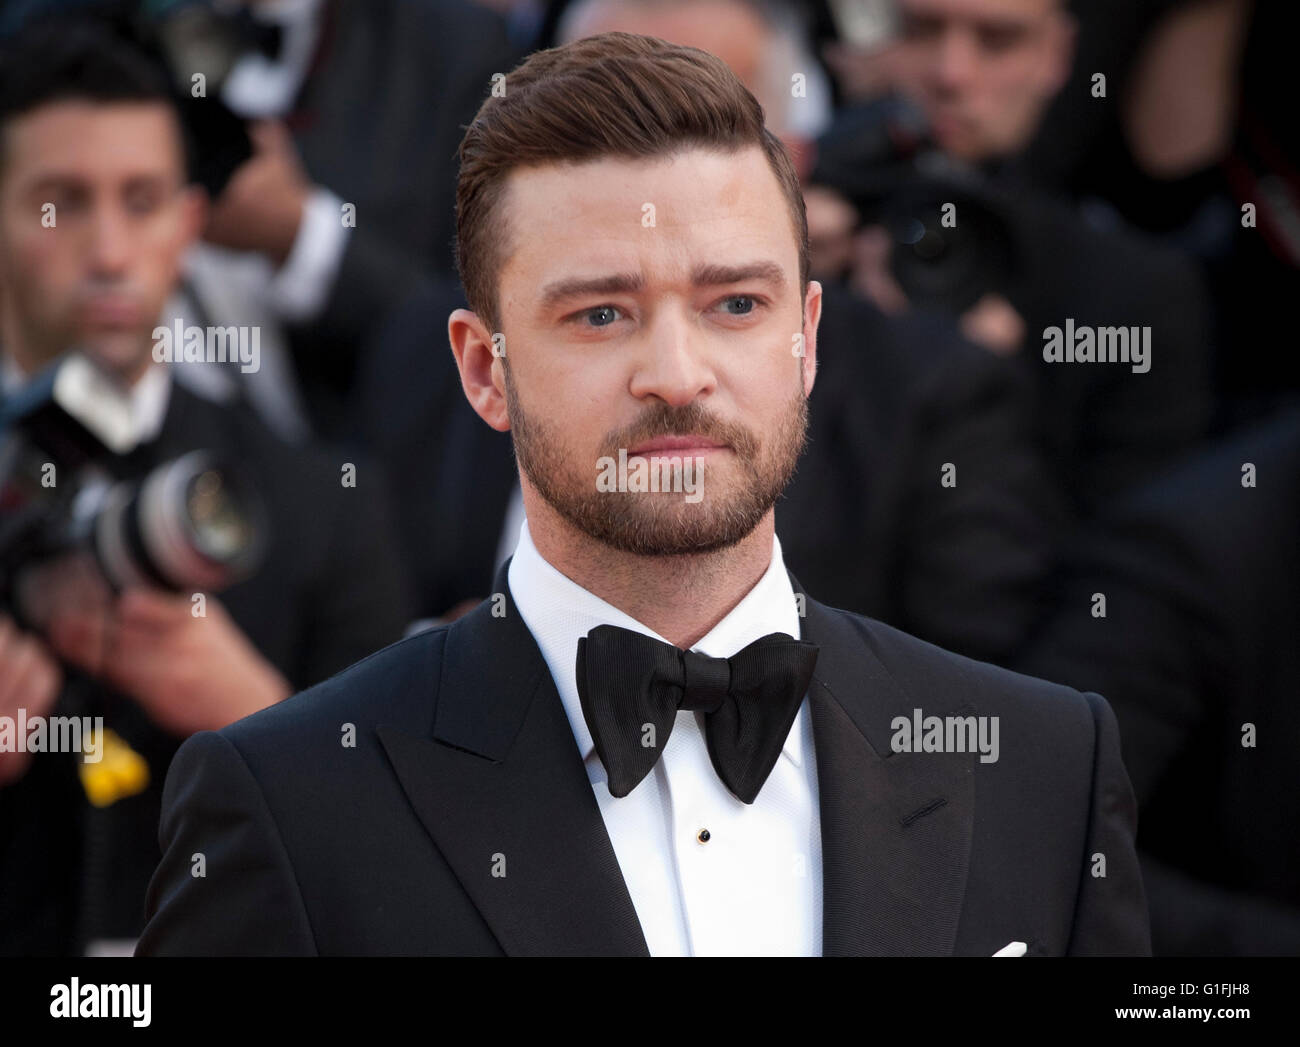 Actor and singer Justin Timberlake at the gala screening for Woody Allen's film Café Society and opening ceremony , Cannes Stock Photo